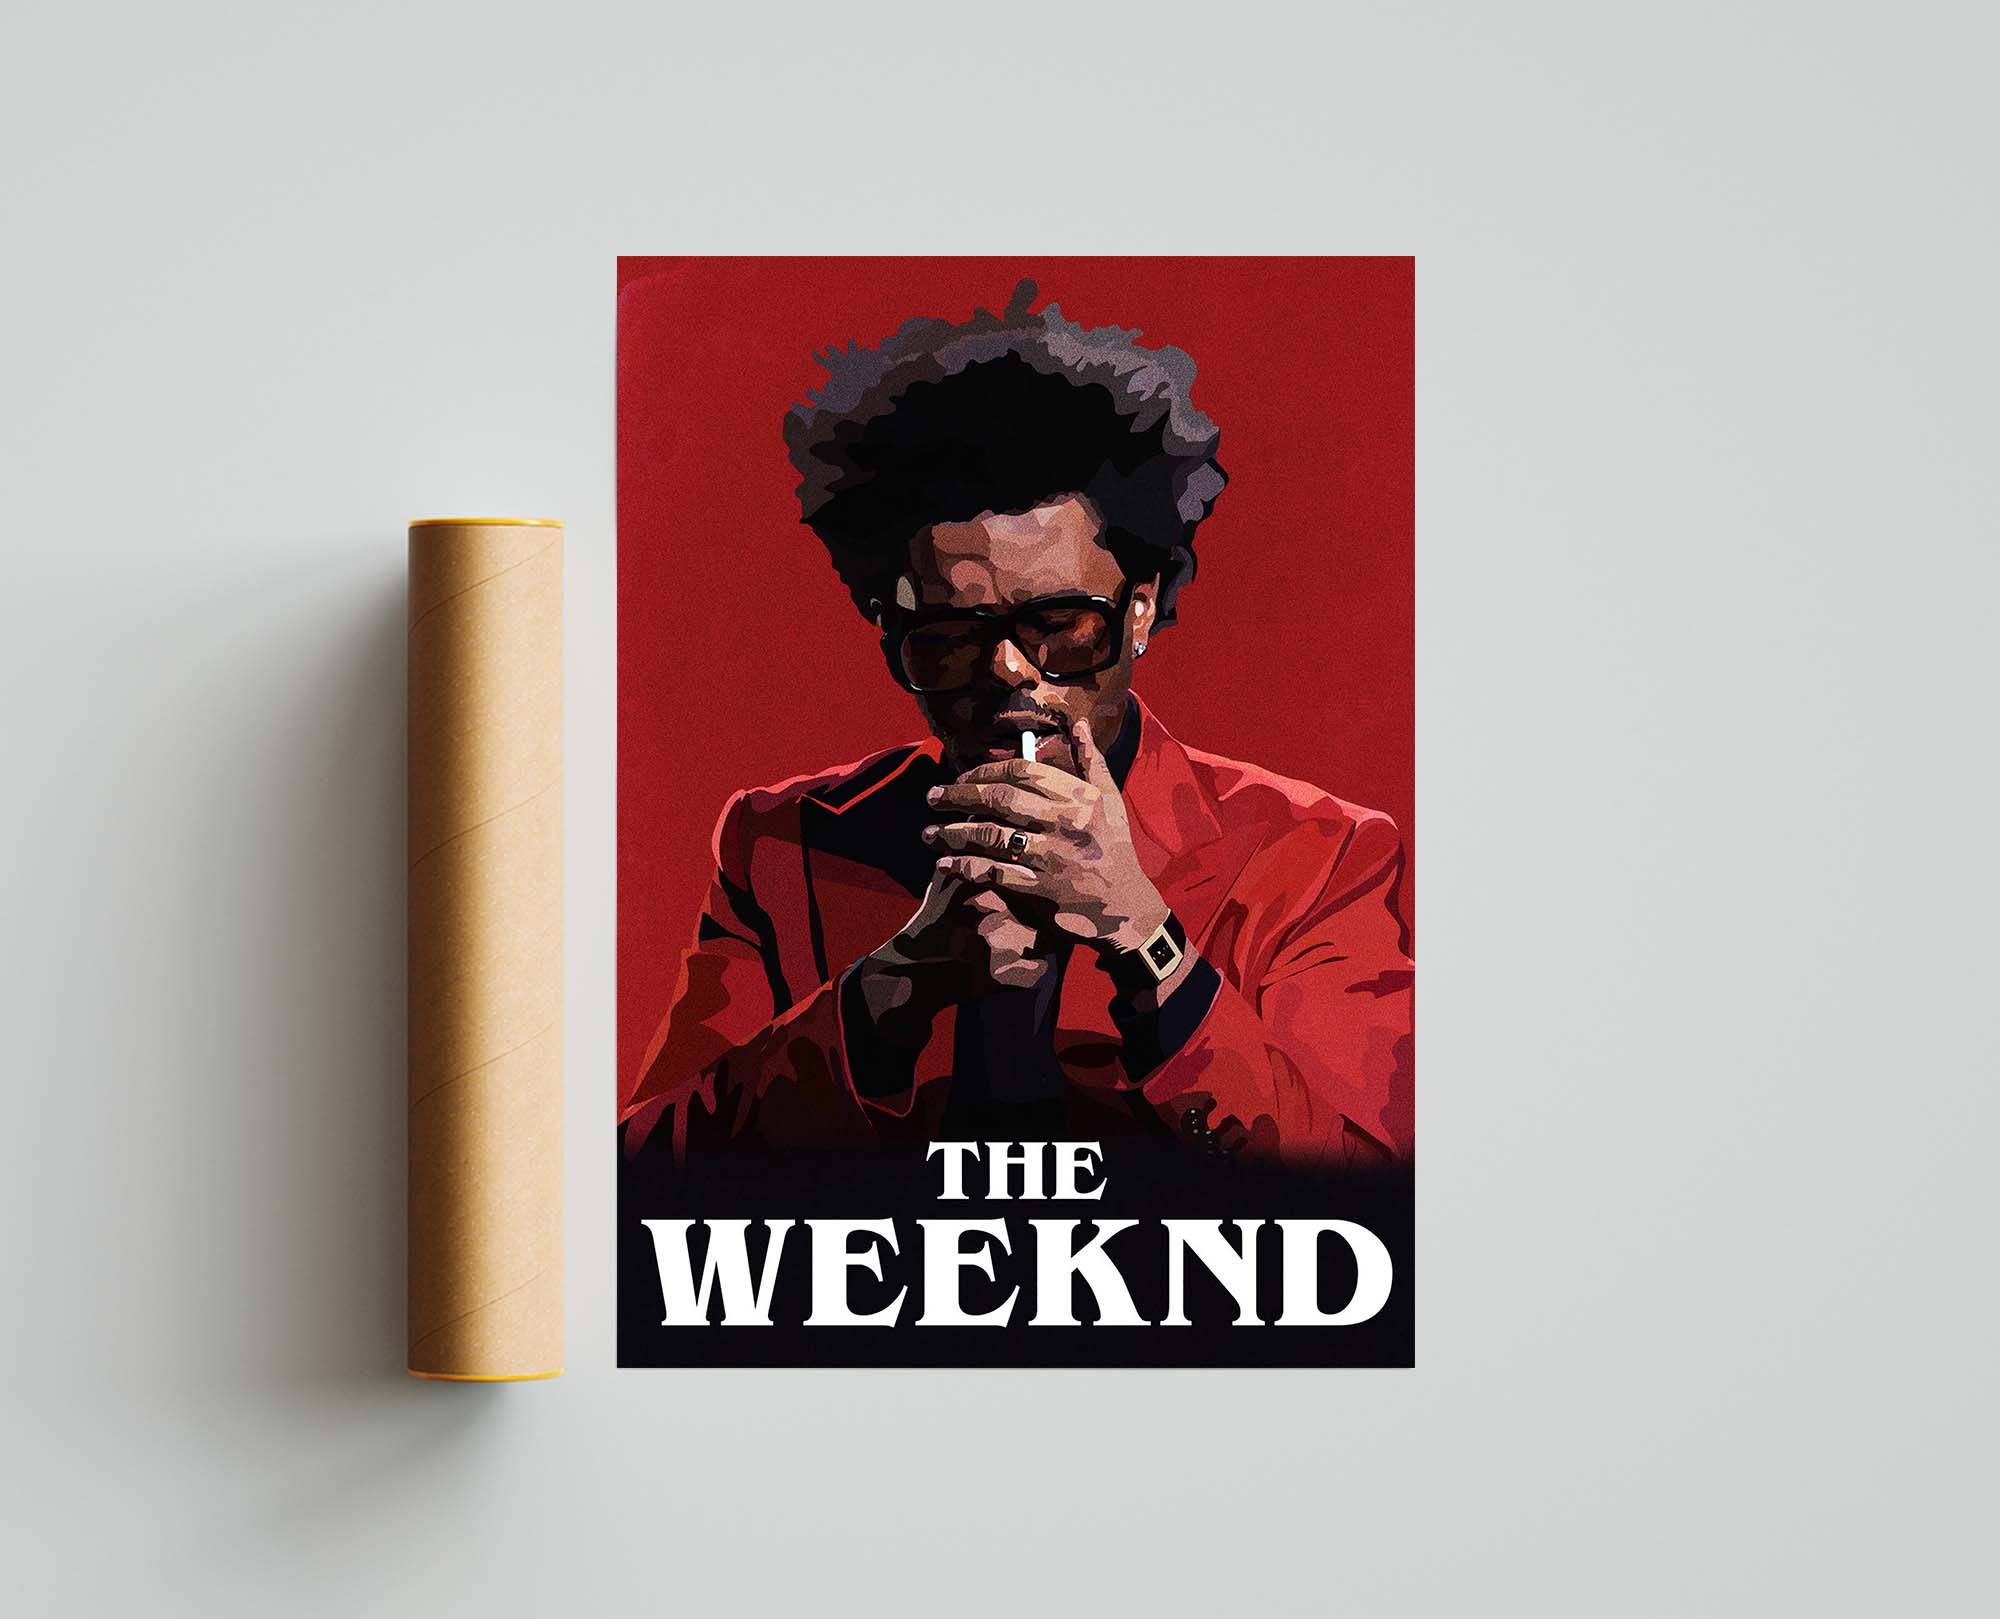 The Weeknd Poster, The Weeknd Inspired Poster, Weekend Floating head  Minimalist Modern Art Print, Poster Print Wall Art, Home Decor - Printiment